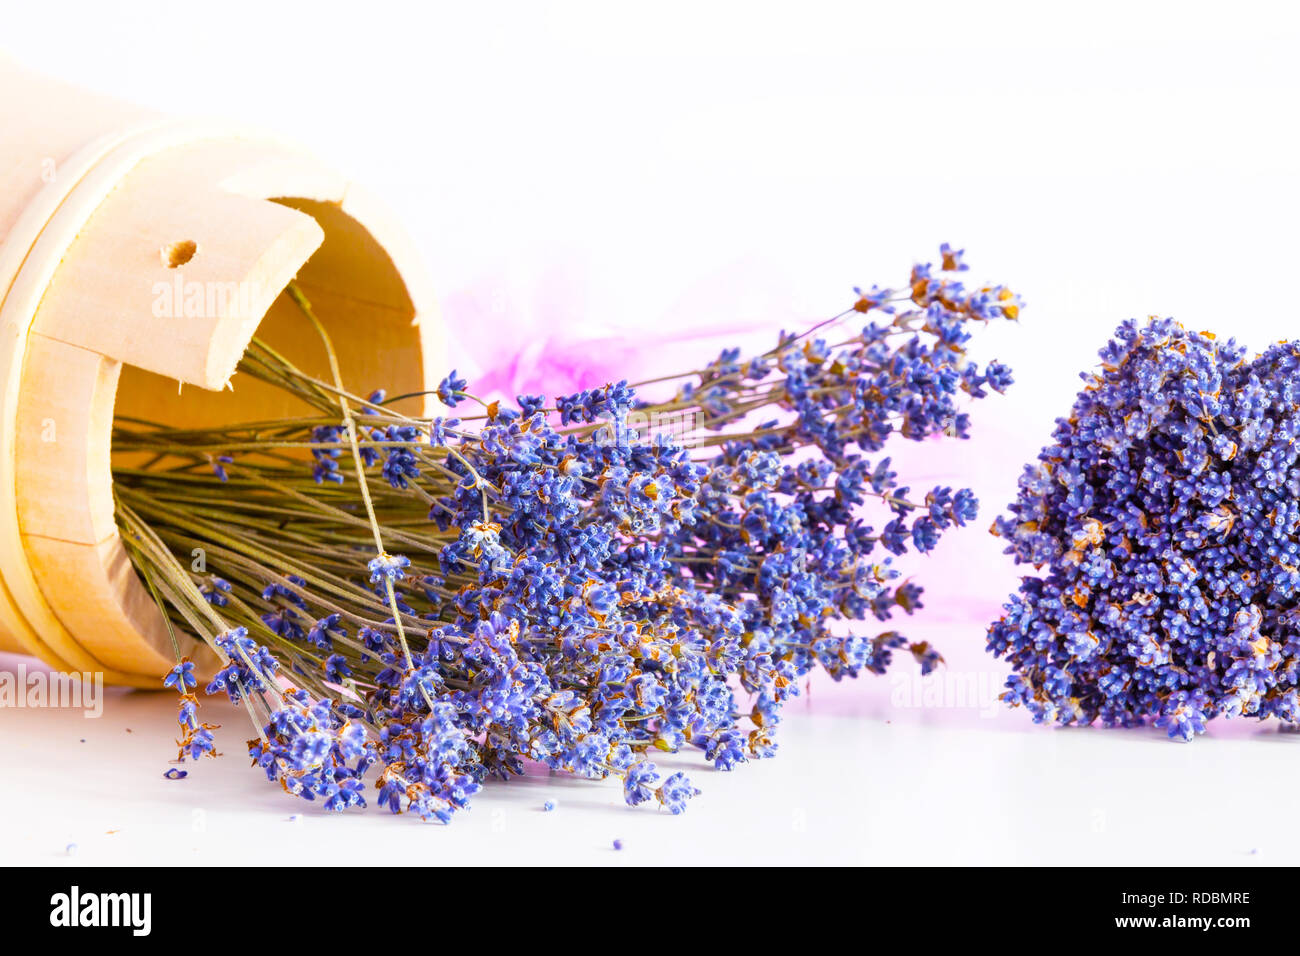 Bunch of dry wild mountain lavender flowers and wooden bowl Stock Photo